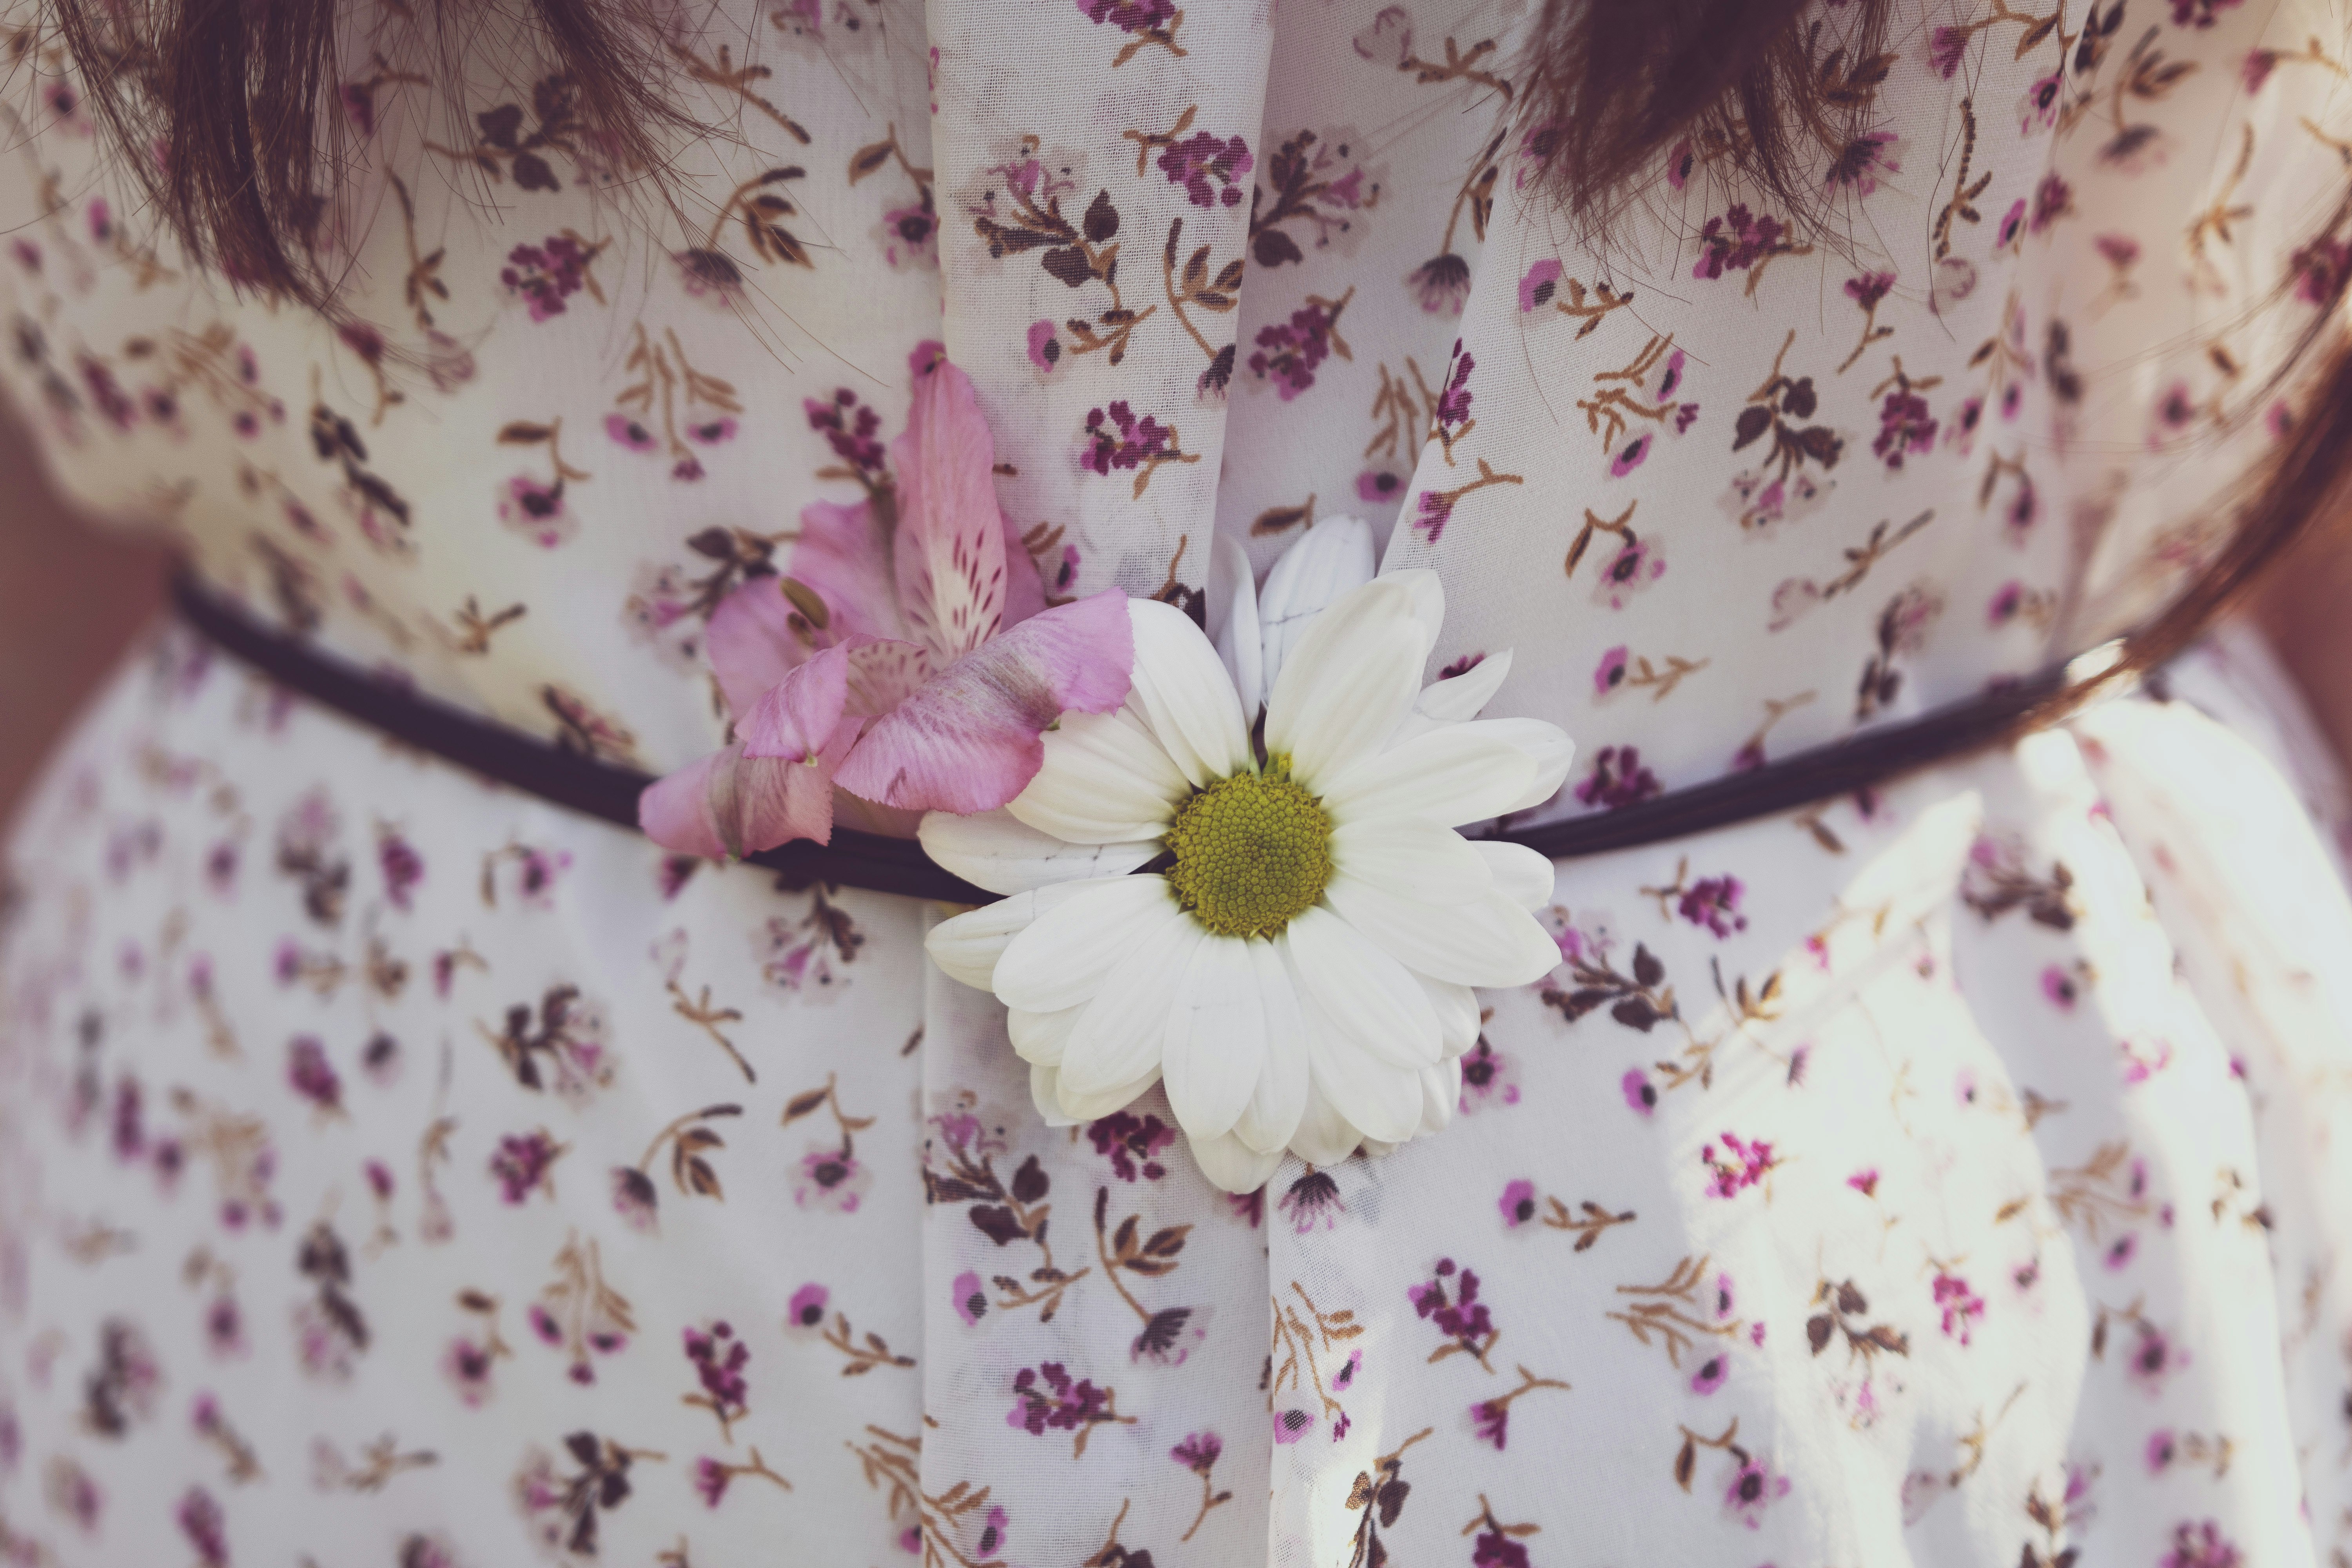 Blooms in the dress with a floral pattern.